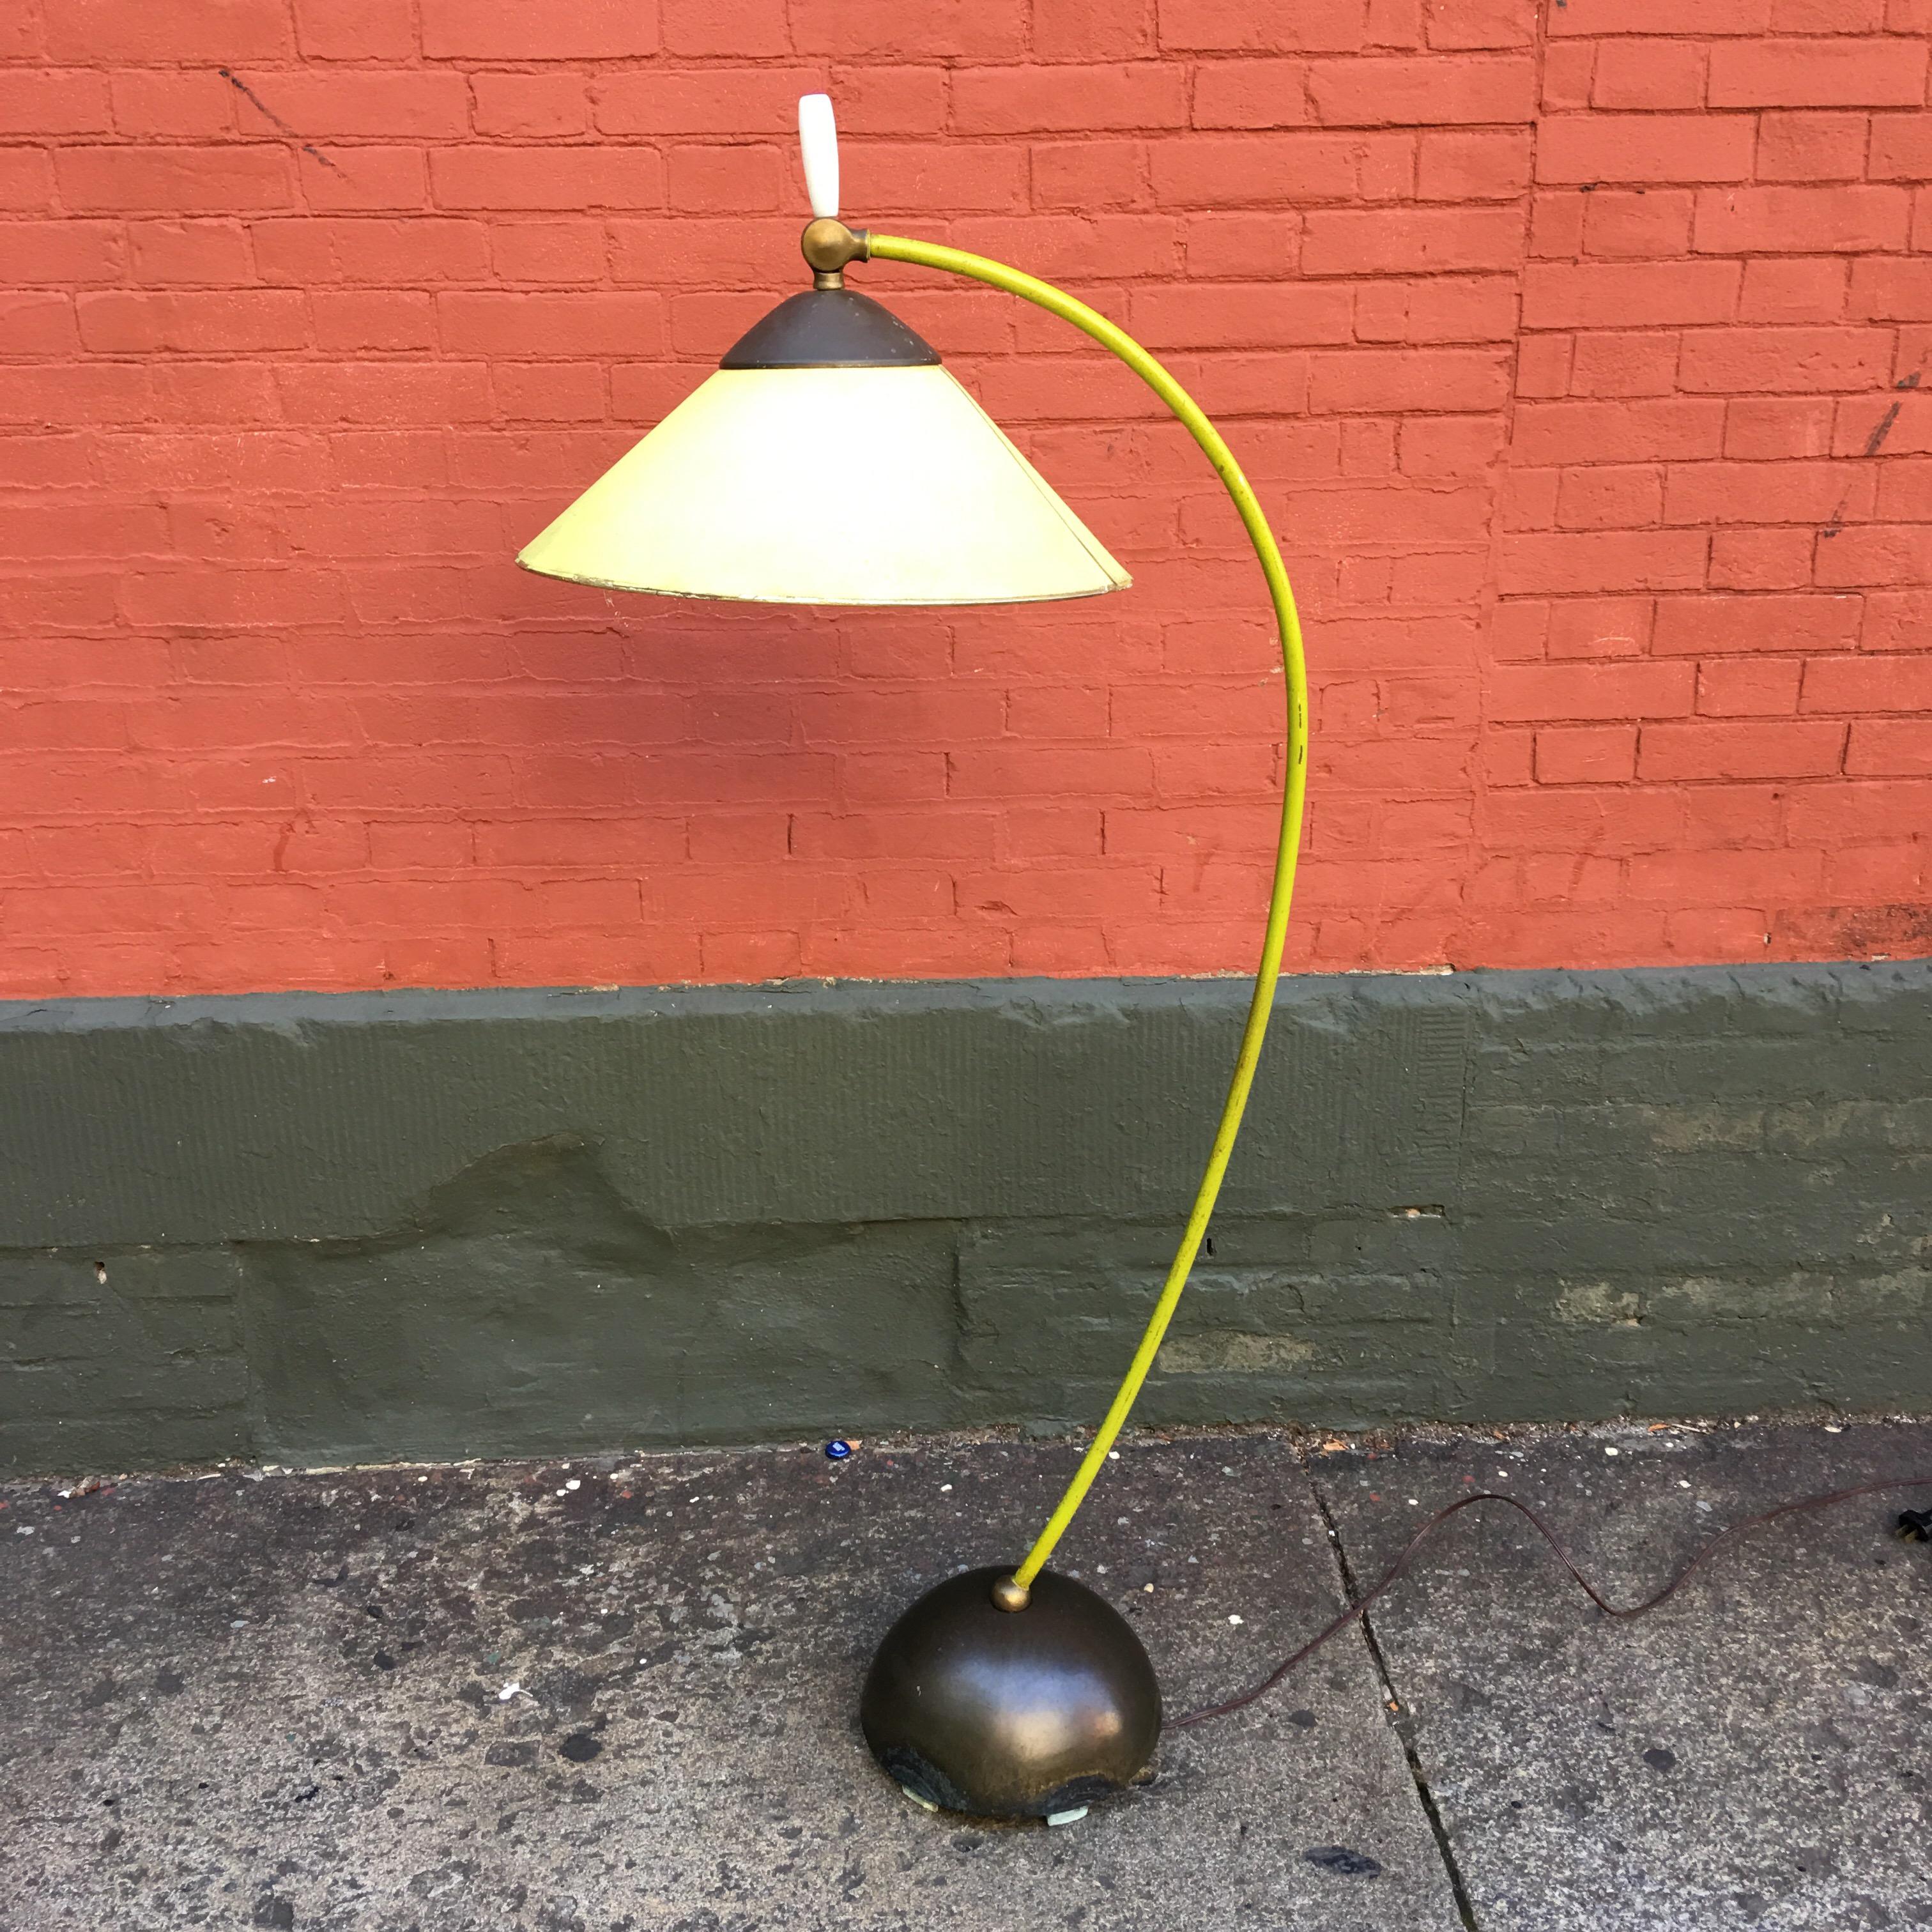 Very original Russel wright floor lamp from the early 1950s. Done for Fairmont Lamp Company for the easier living line. Stem of the lamp pivots in multiple directions for ease of directing light. The shade also pivots to adjust angle. Dome base is